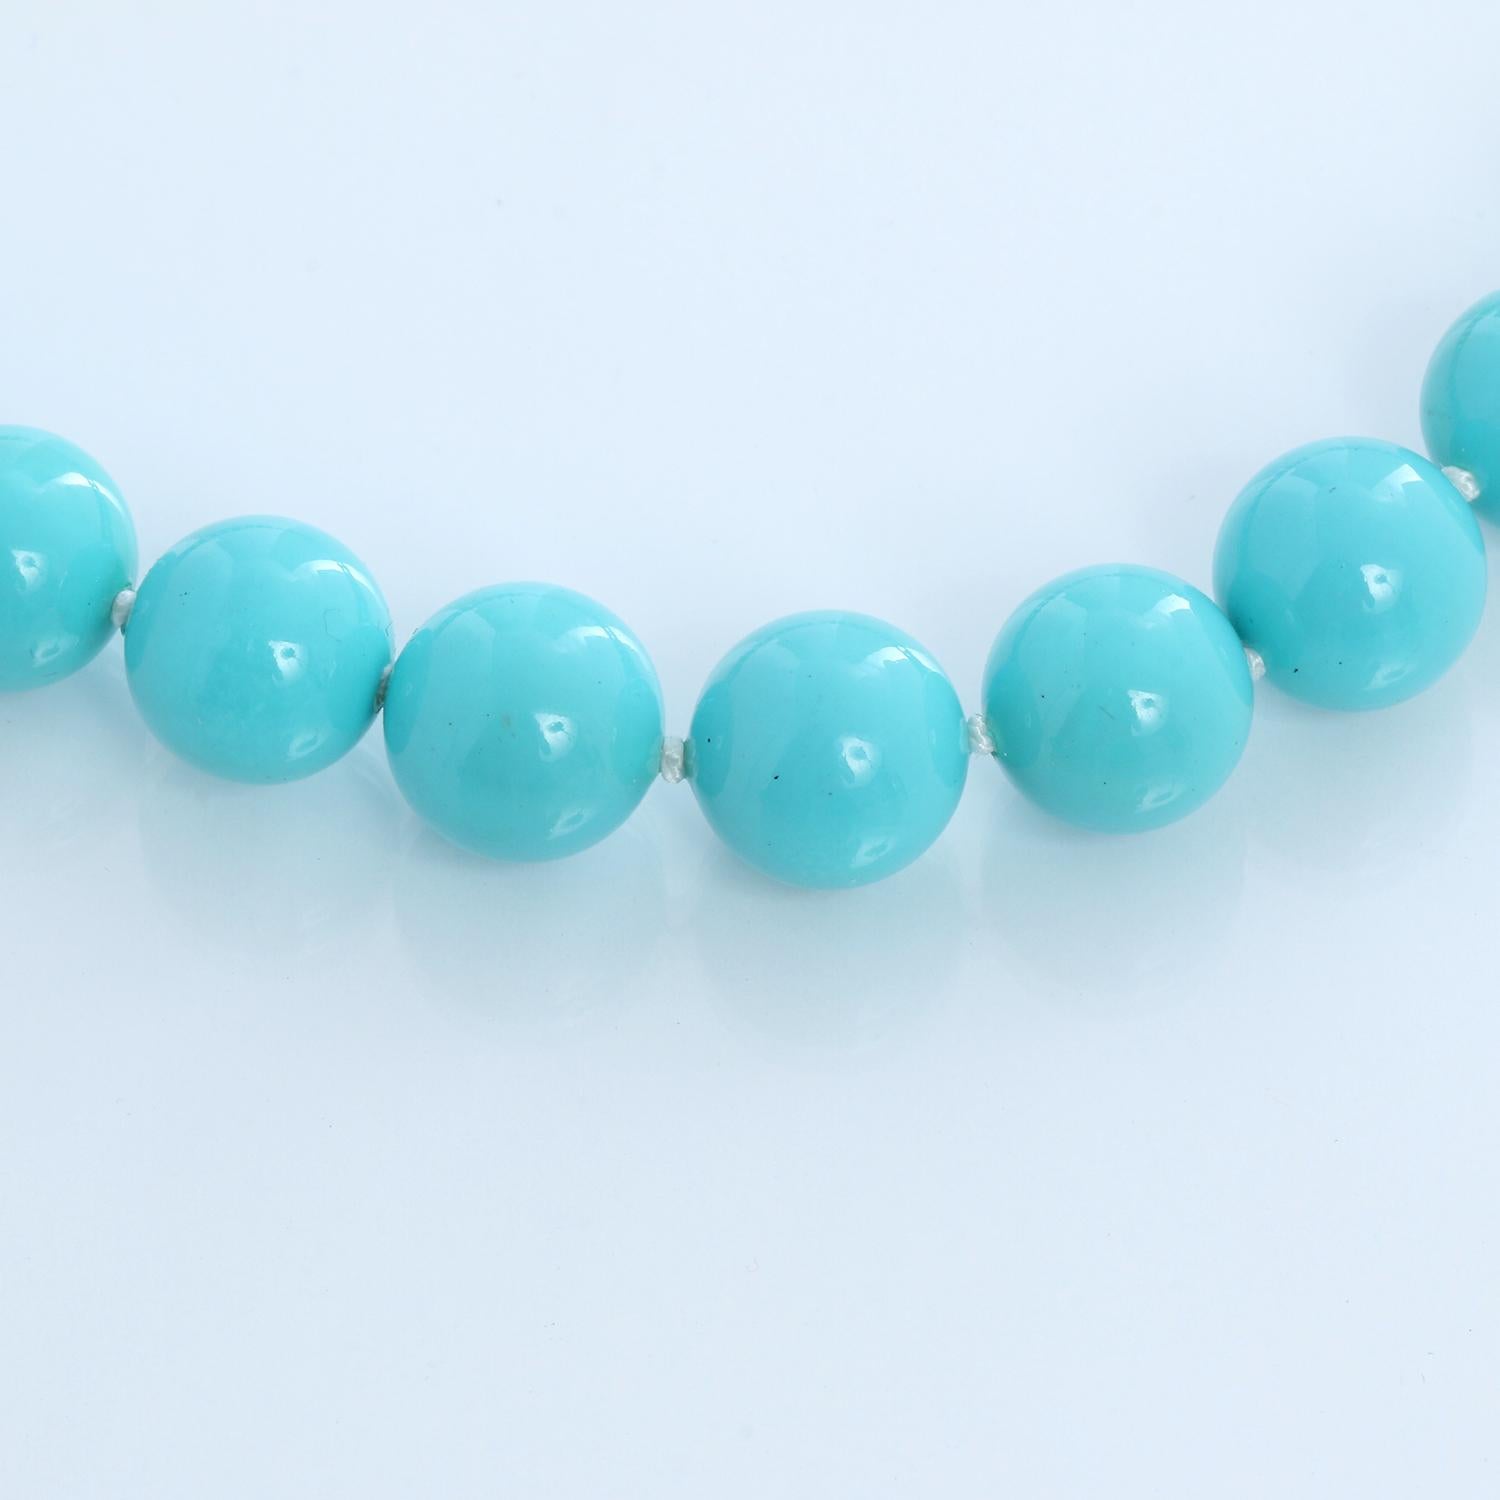 Turquoise Color Bead Necklace In Excellent Condition For Sale In Dallas, TX